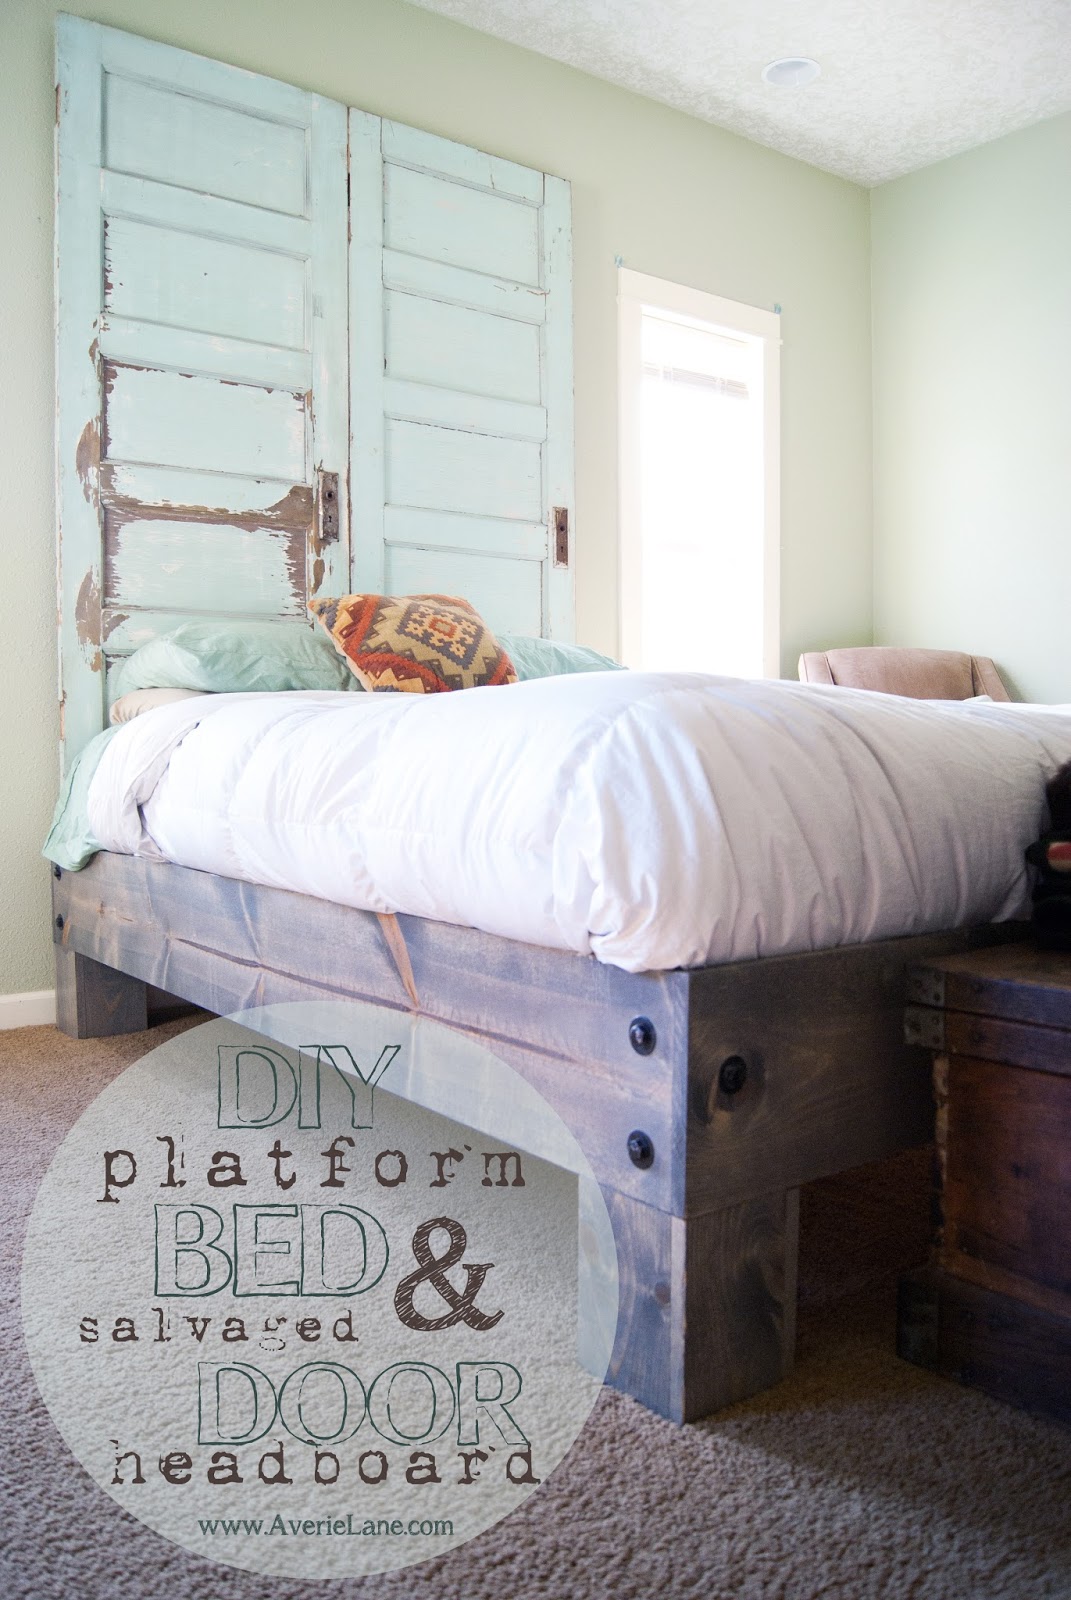 platform build three platform part  how a bed bed headboard with diy to